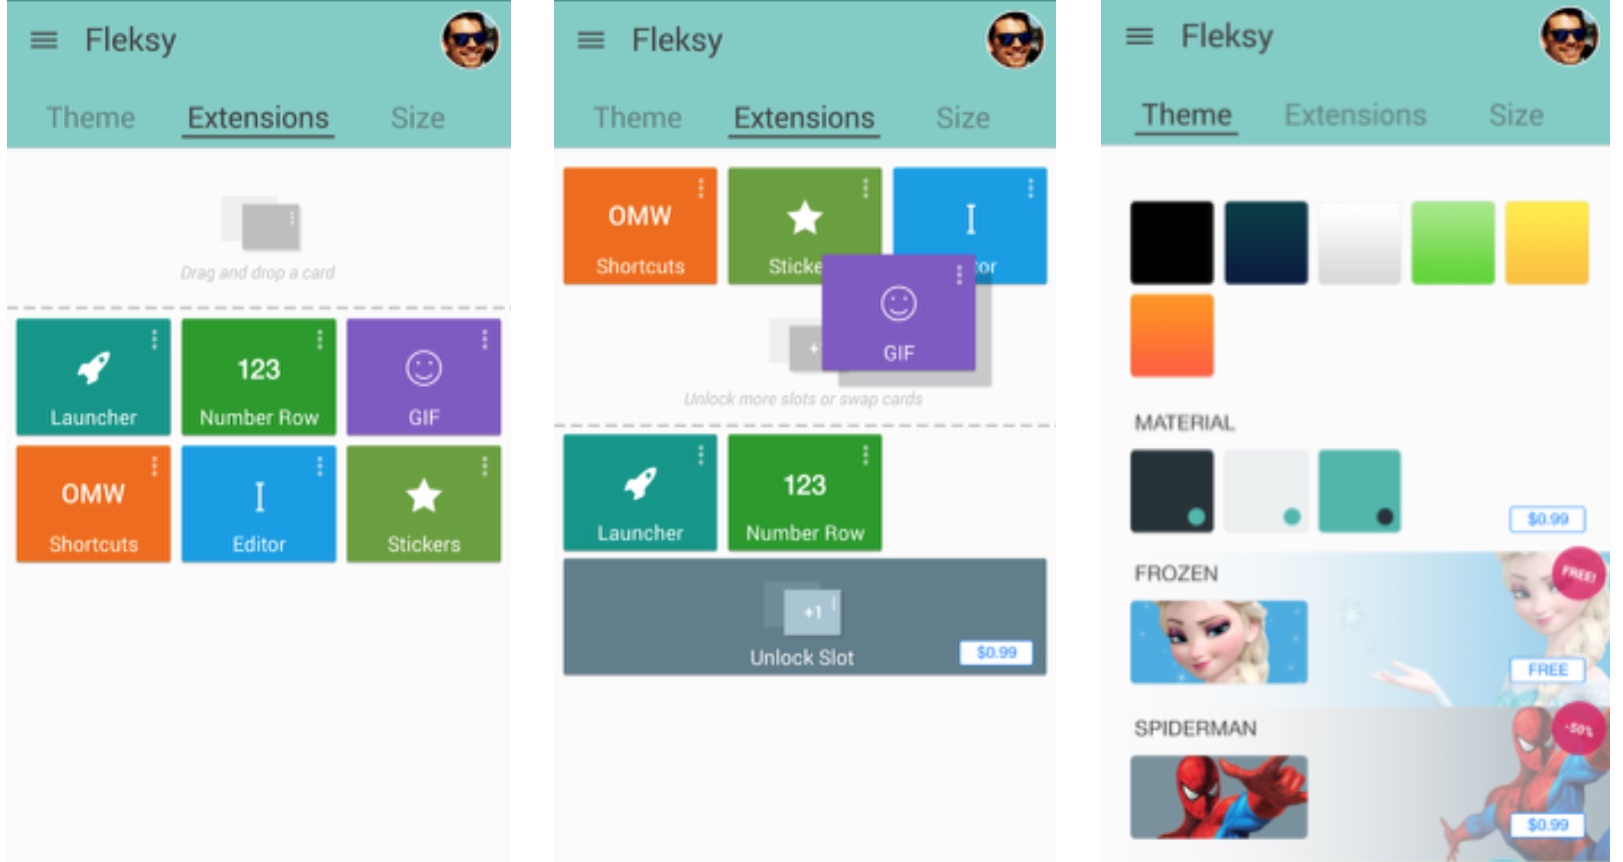 Fleksy 5.0 for iOS built-in store